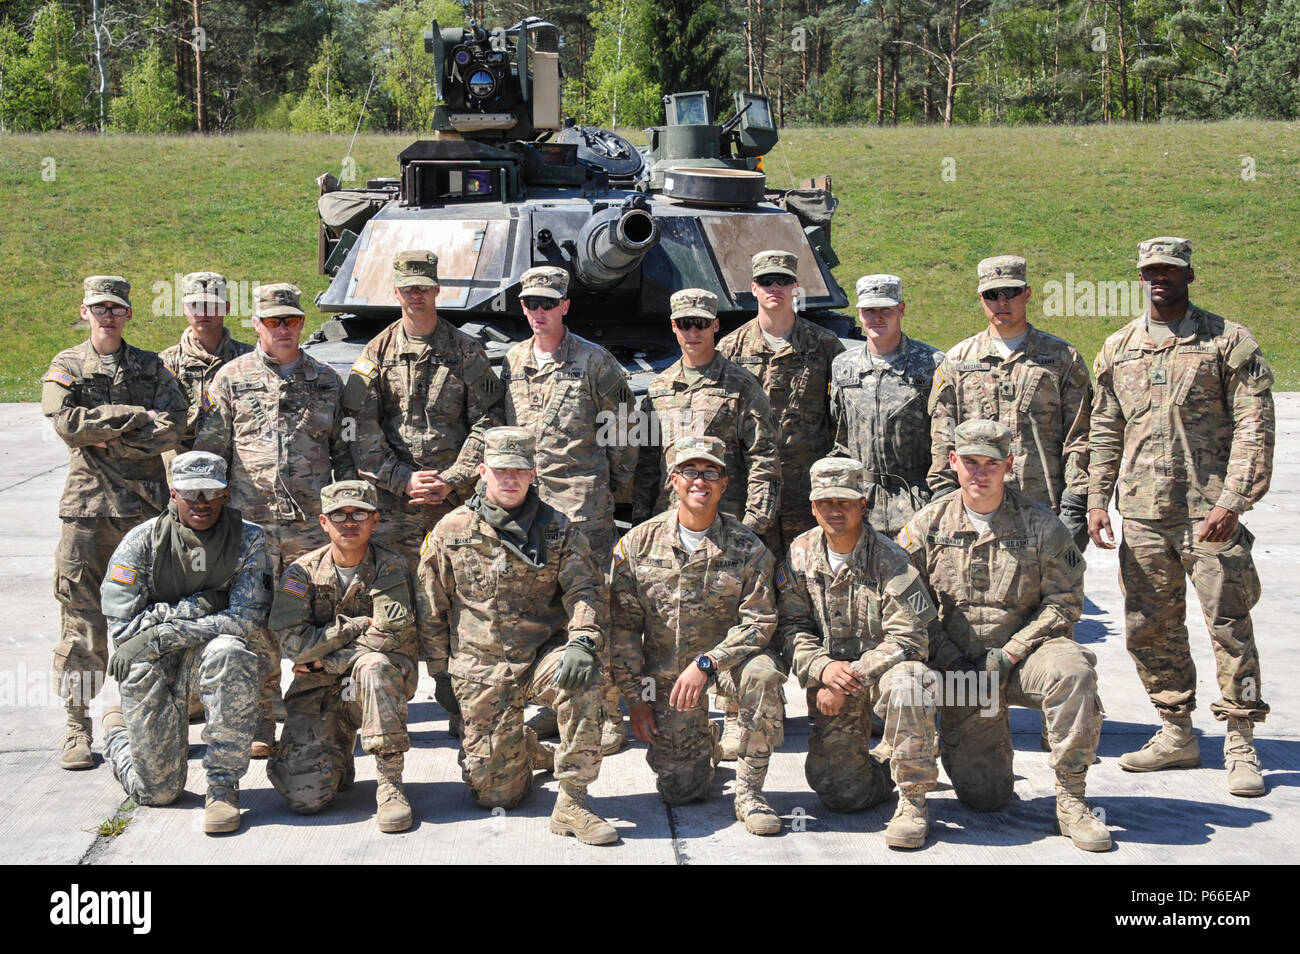 U.S. Soldiers with 3rd Infantry Division participating in the Strong Europe Tank Challenge (SETC) pose for a group photo May 08, 2016 at Grafenwoehr Training Area, Germany. The SETC is co-hosted by U.S. Army Europe and the German Bundeswehr May 10-13, 2016. The competition is designed to foster military partnership while promoting NATO interoperability. Seven platoons from six NATO nations are competing in SETC - the first multinational tank challenge at Grafenwoehr in 25 years. For more photos, videos and stories from the Strong Europe Tank Challenge, go to http://www.eur.army.mil/tankchallen Stock Photo